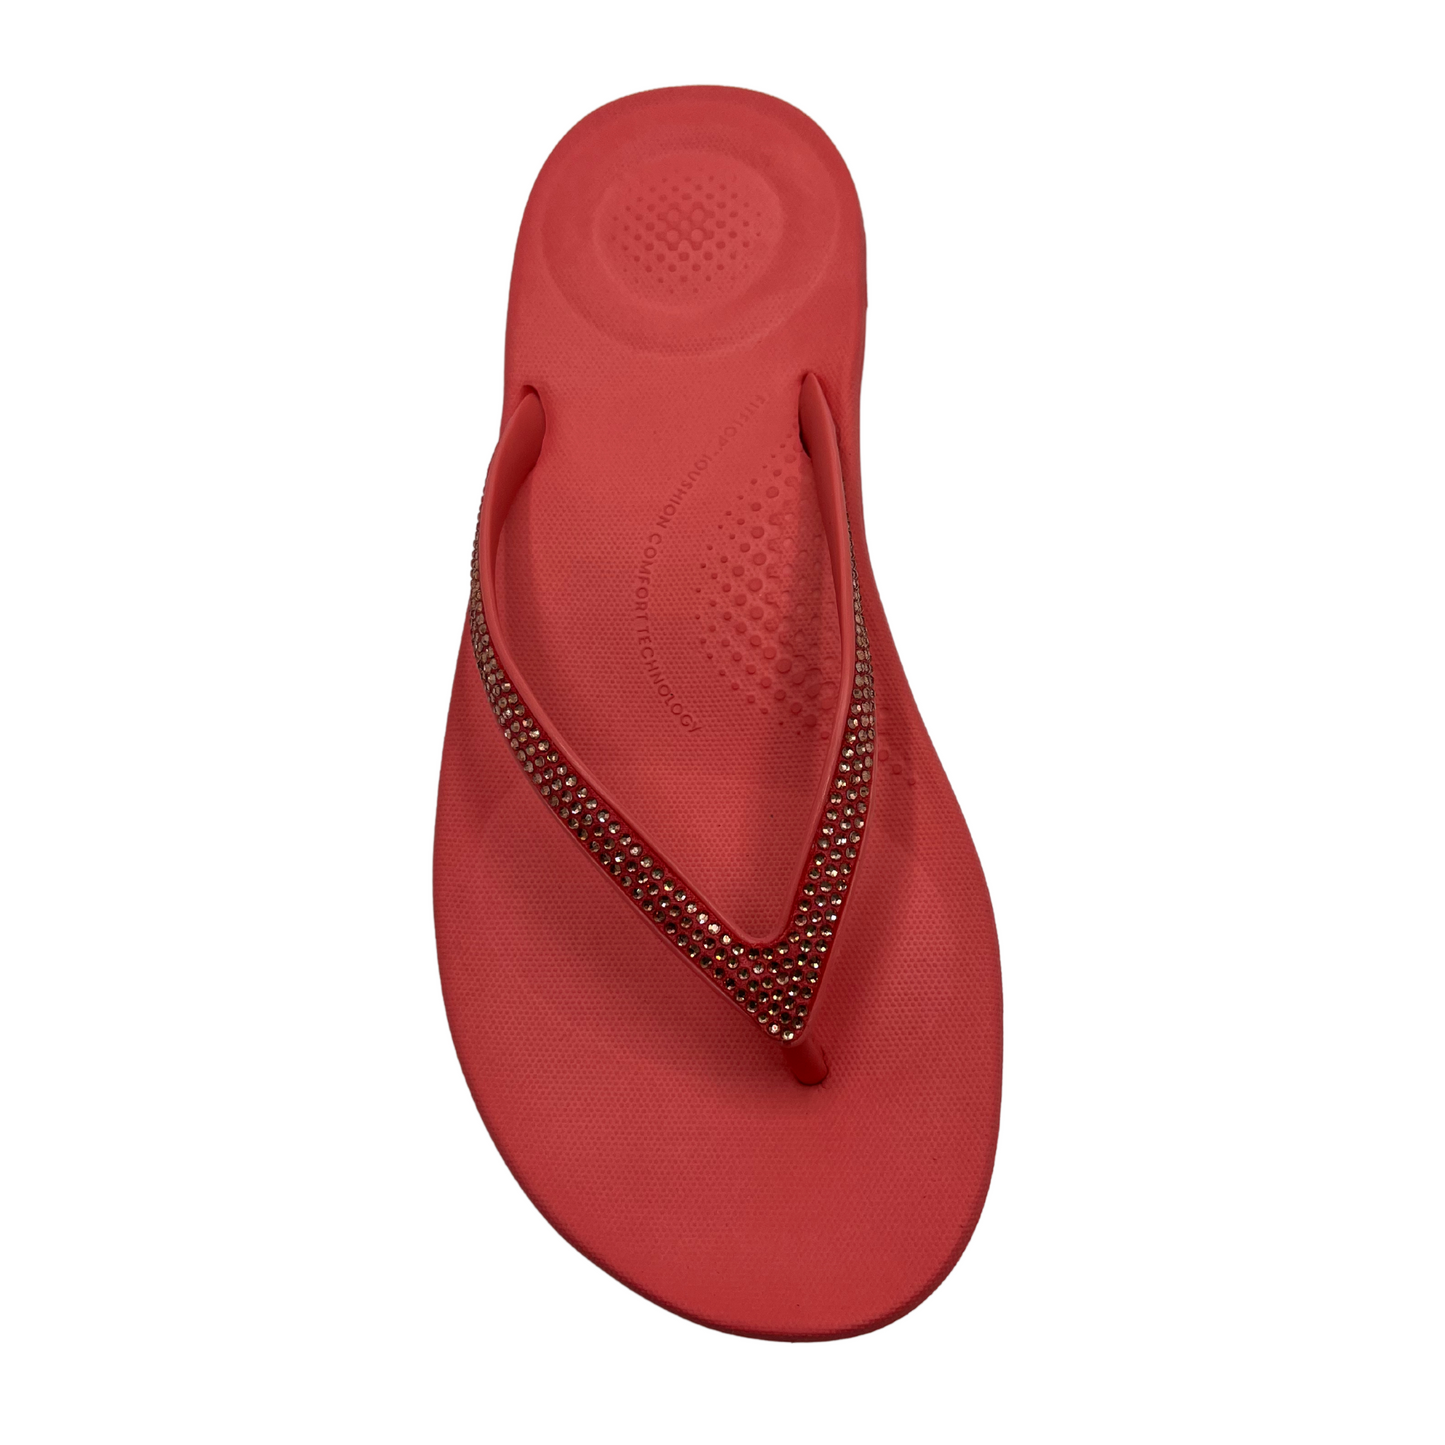 Top view of rosy coral flip flop with bejewelled thong strap